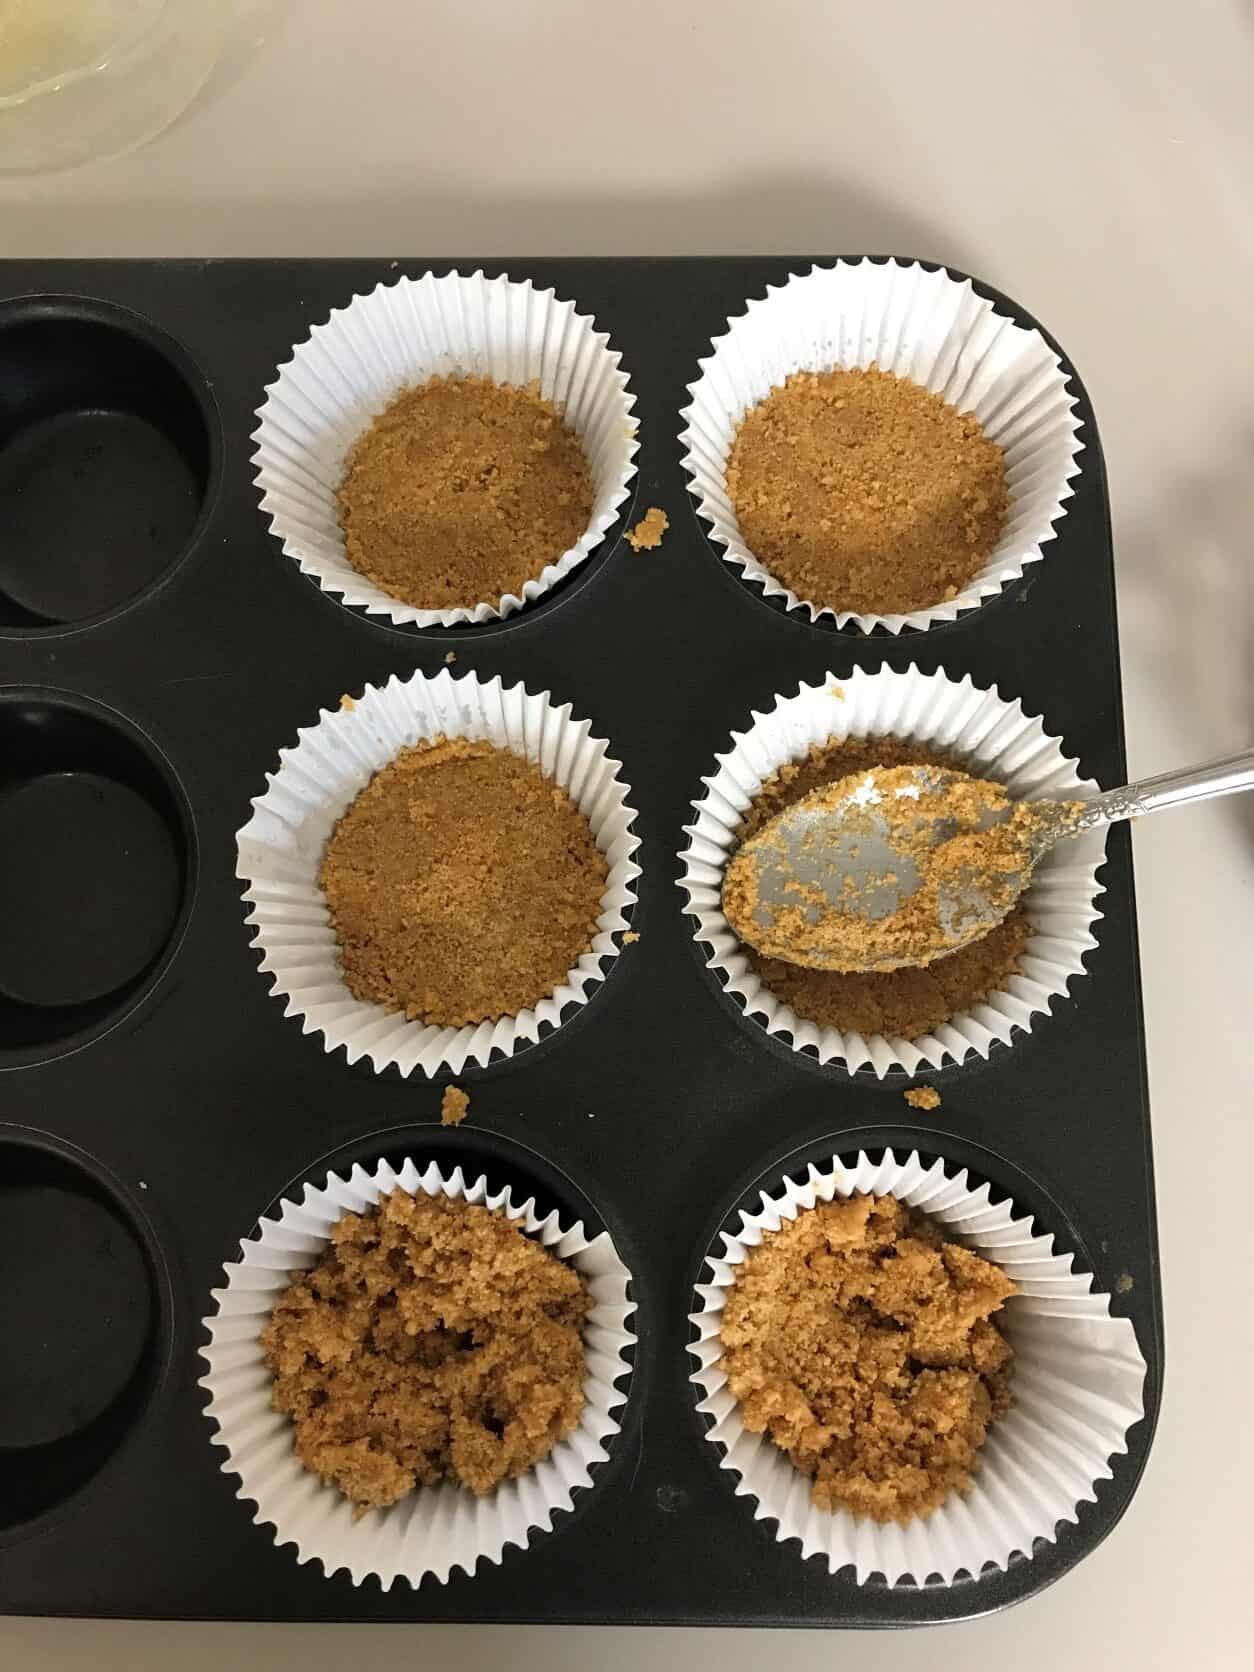 graham cracker crumbs in a muffin liner